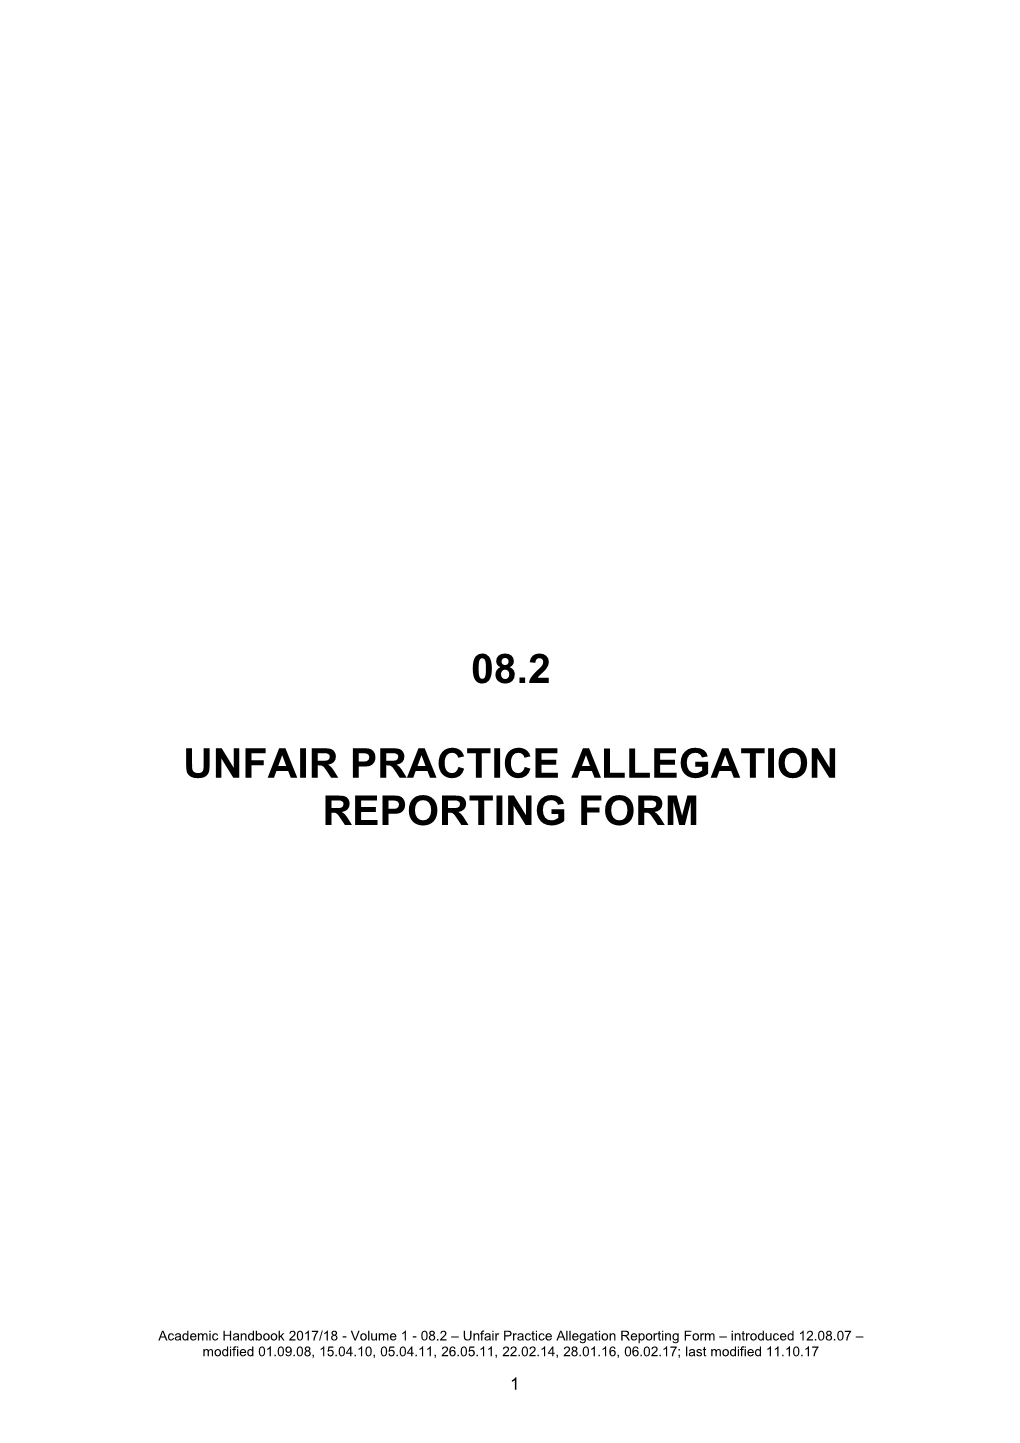 08-02 Unfair Practice Allegation Reporting Form